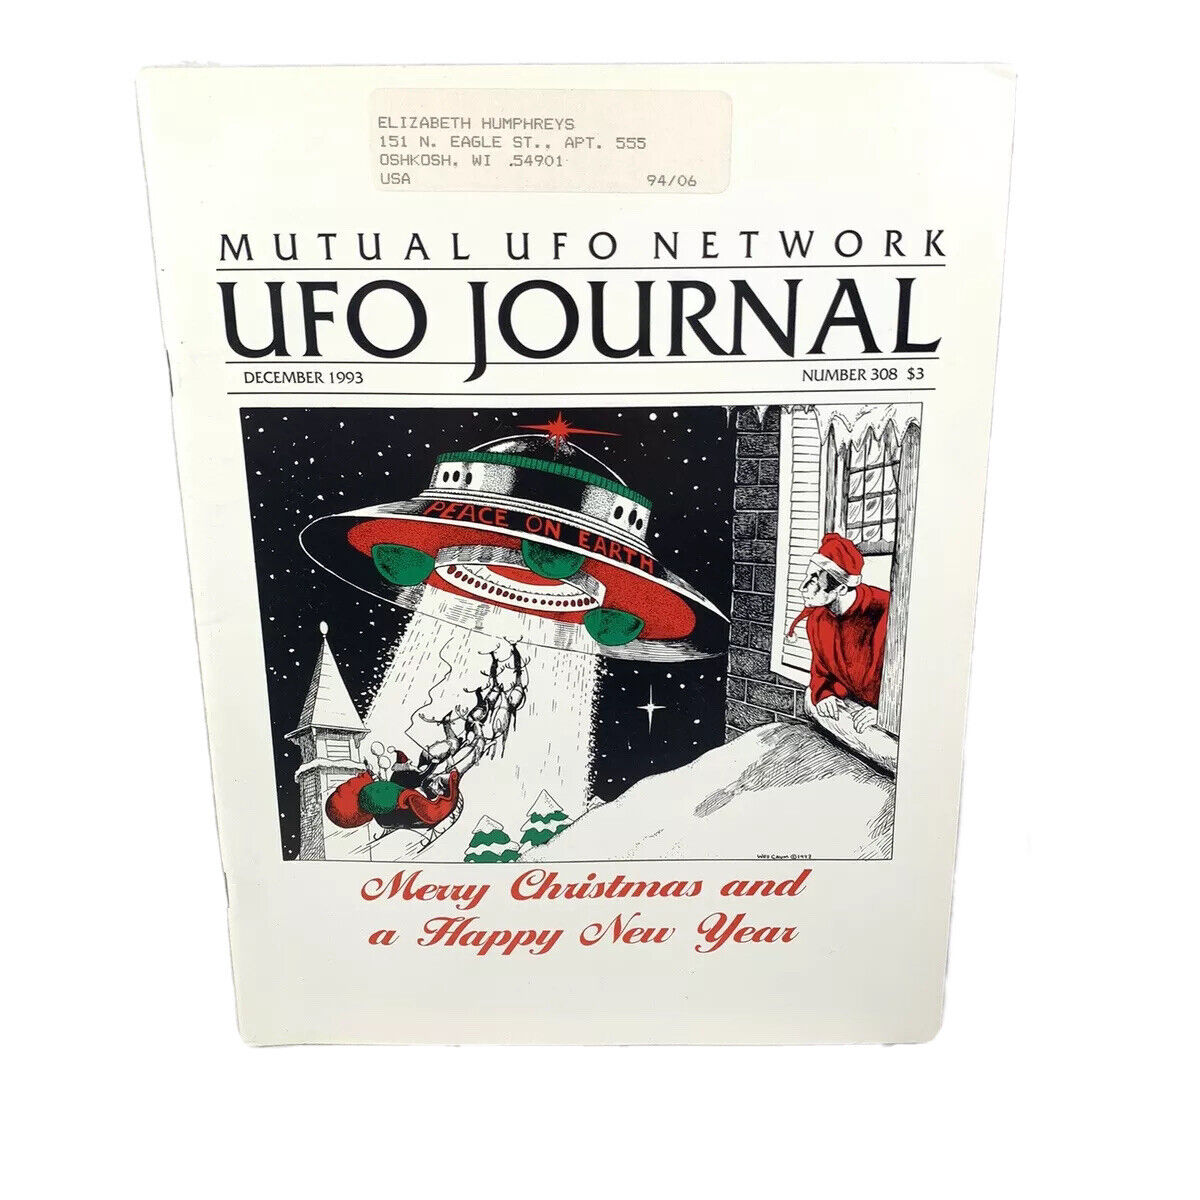 Mutual UFO Network UFO Journal December 1993 Issue Number 308